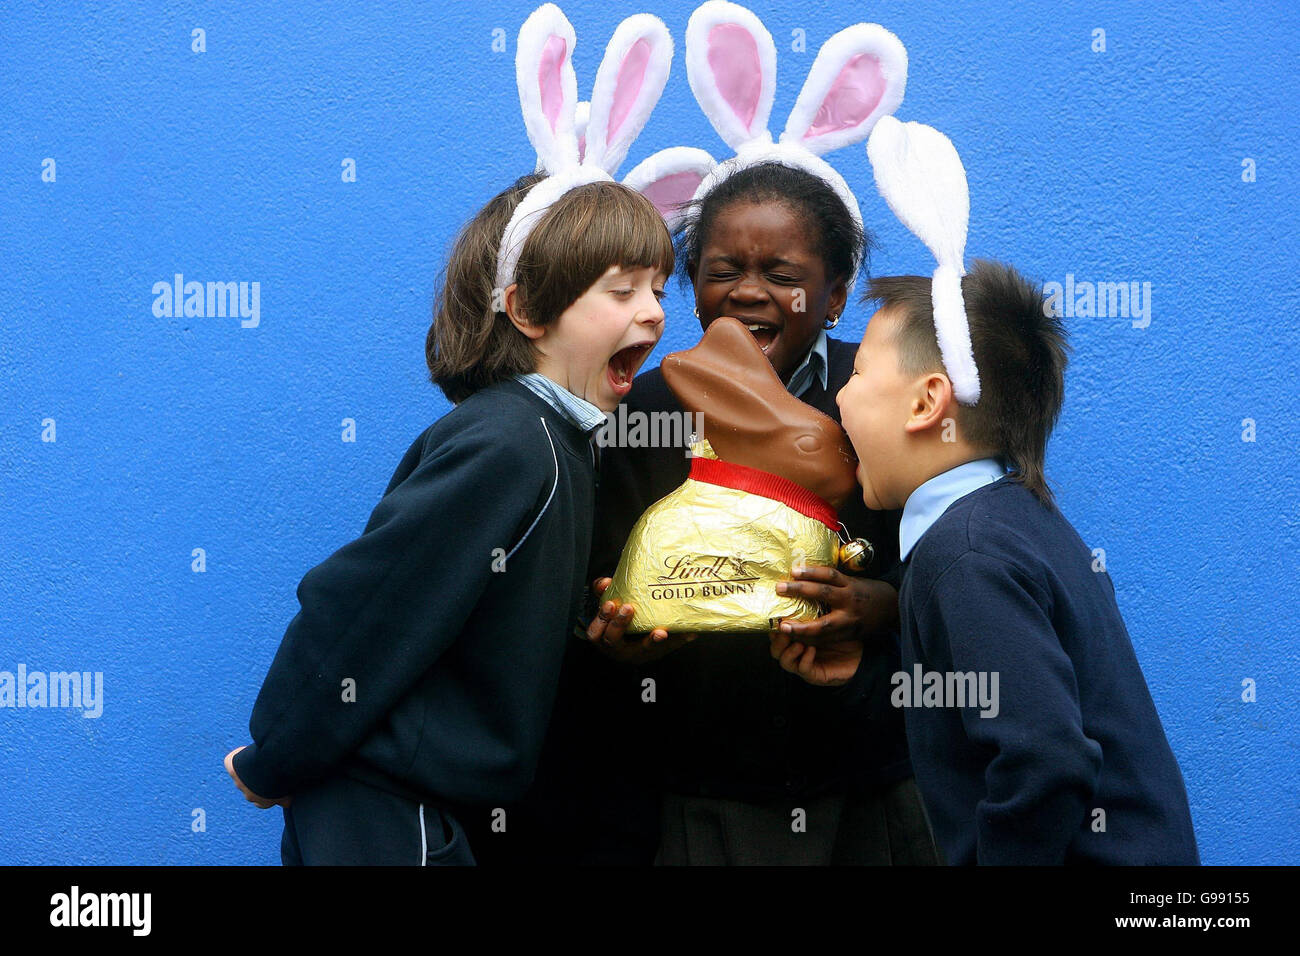 Anand Euchbold, Yura Dovydov (left), Fumny Salami (centre) enjoy a Lindt easter egg at St Aodoen's Primary School in Dublin during the Gold Lindt Easter Bunny visit, Tuesday March 28, 2006. PRESS ASSOCIATION Photo. Photo credit should read: Julien Behal/PA Stock Photo